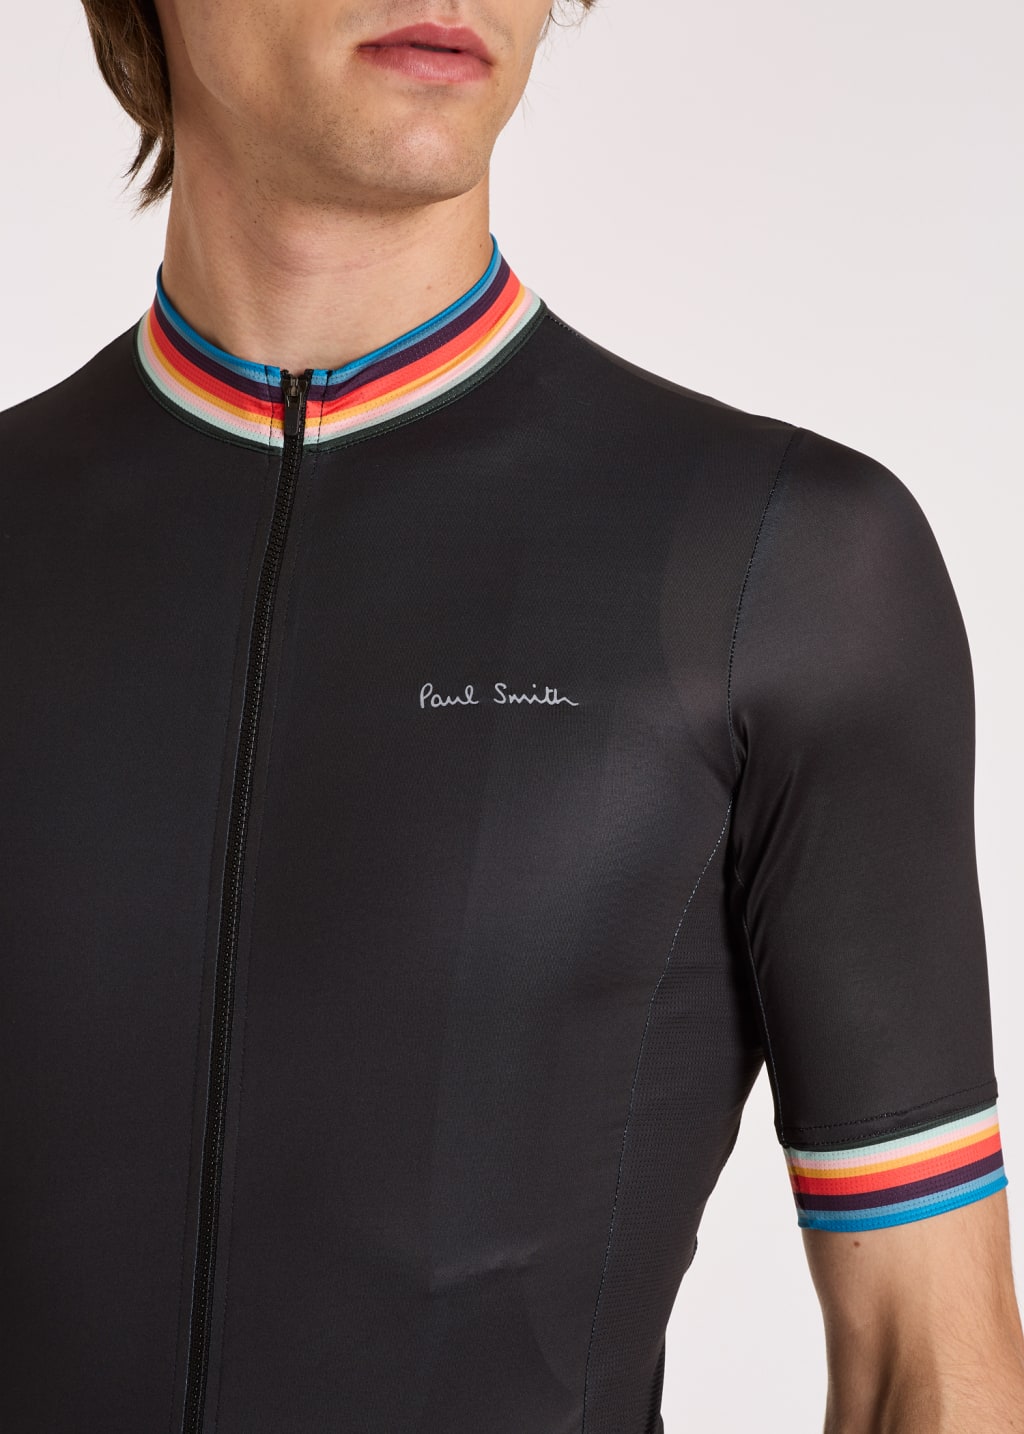 Model View - Men's Black Race Fit Cycling Jersey With 'Artist Stripe' Trims by Paul Smith